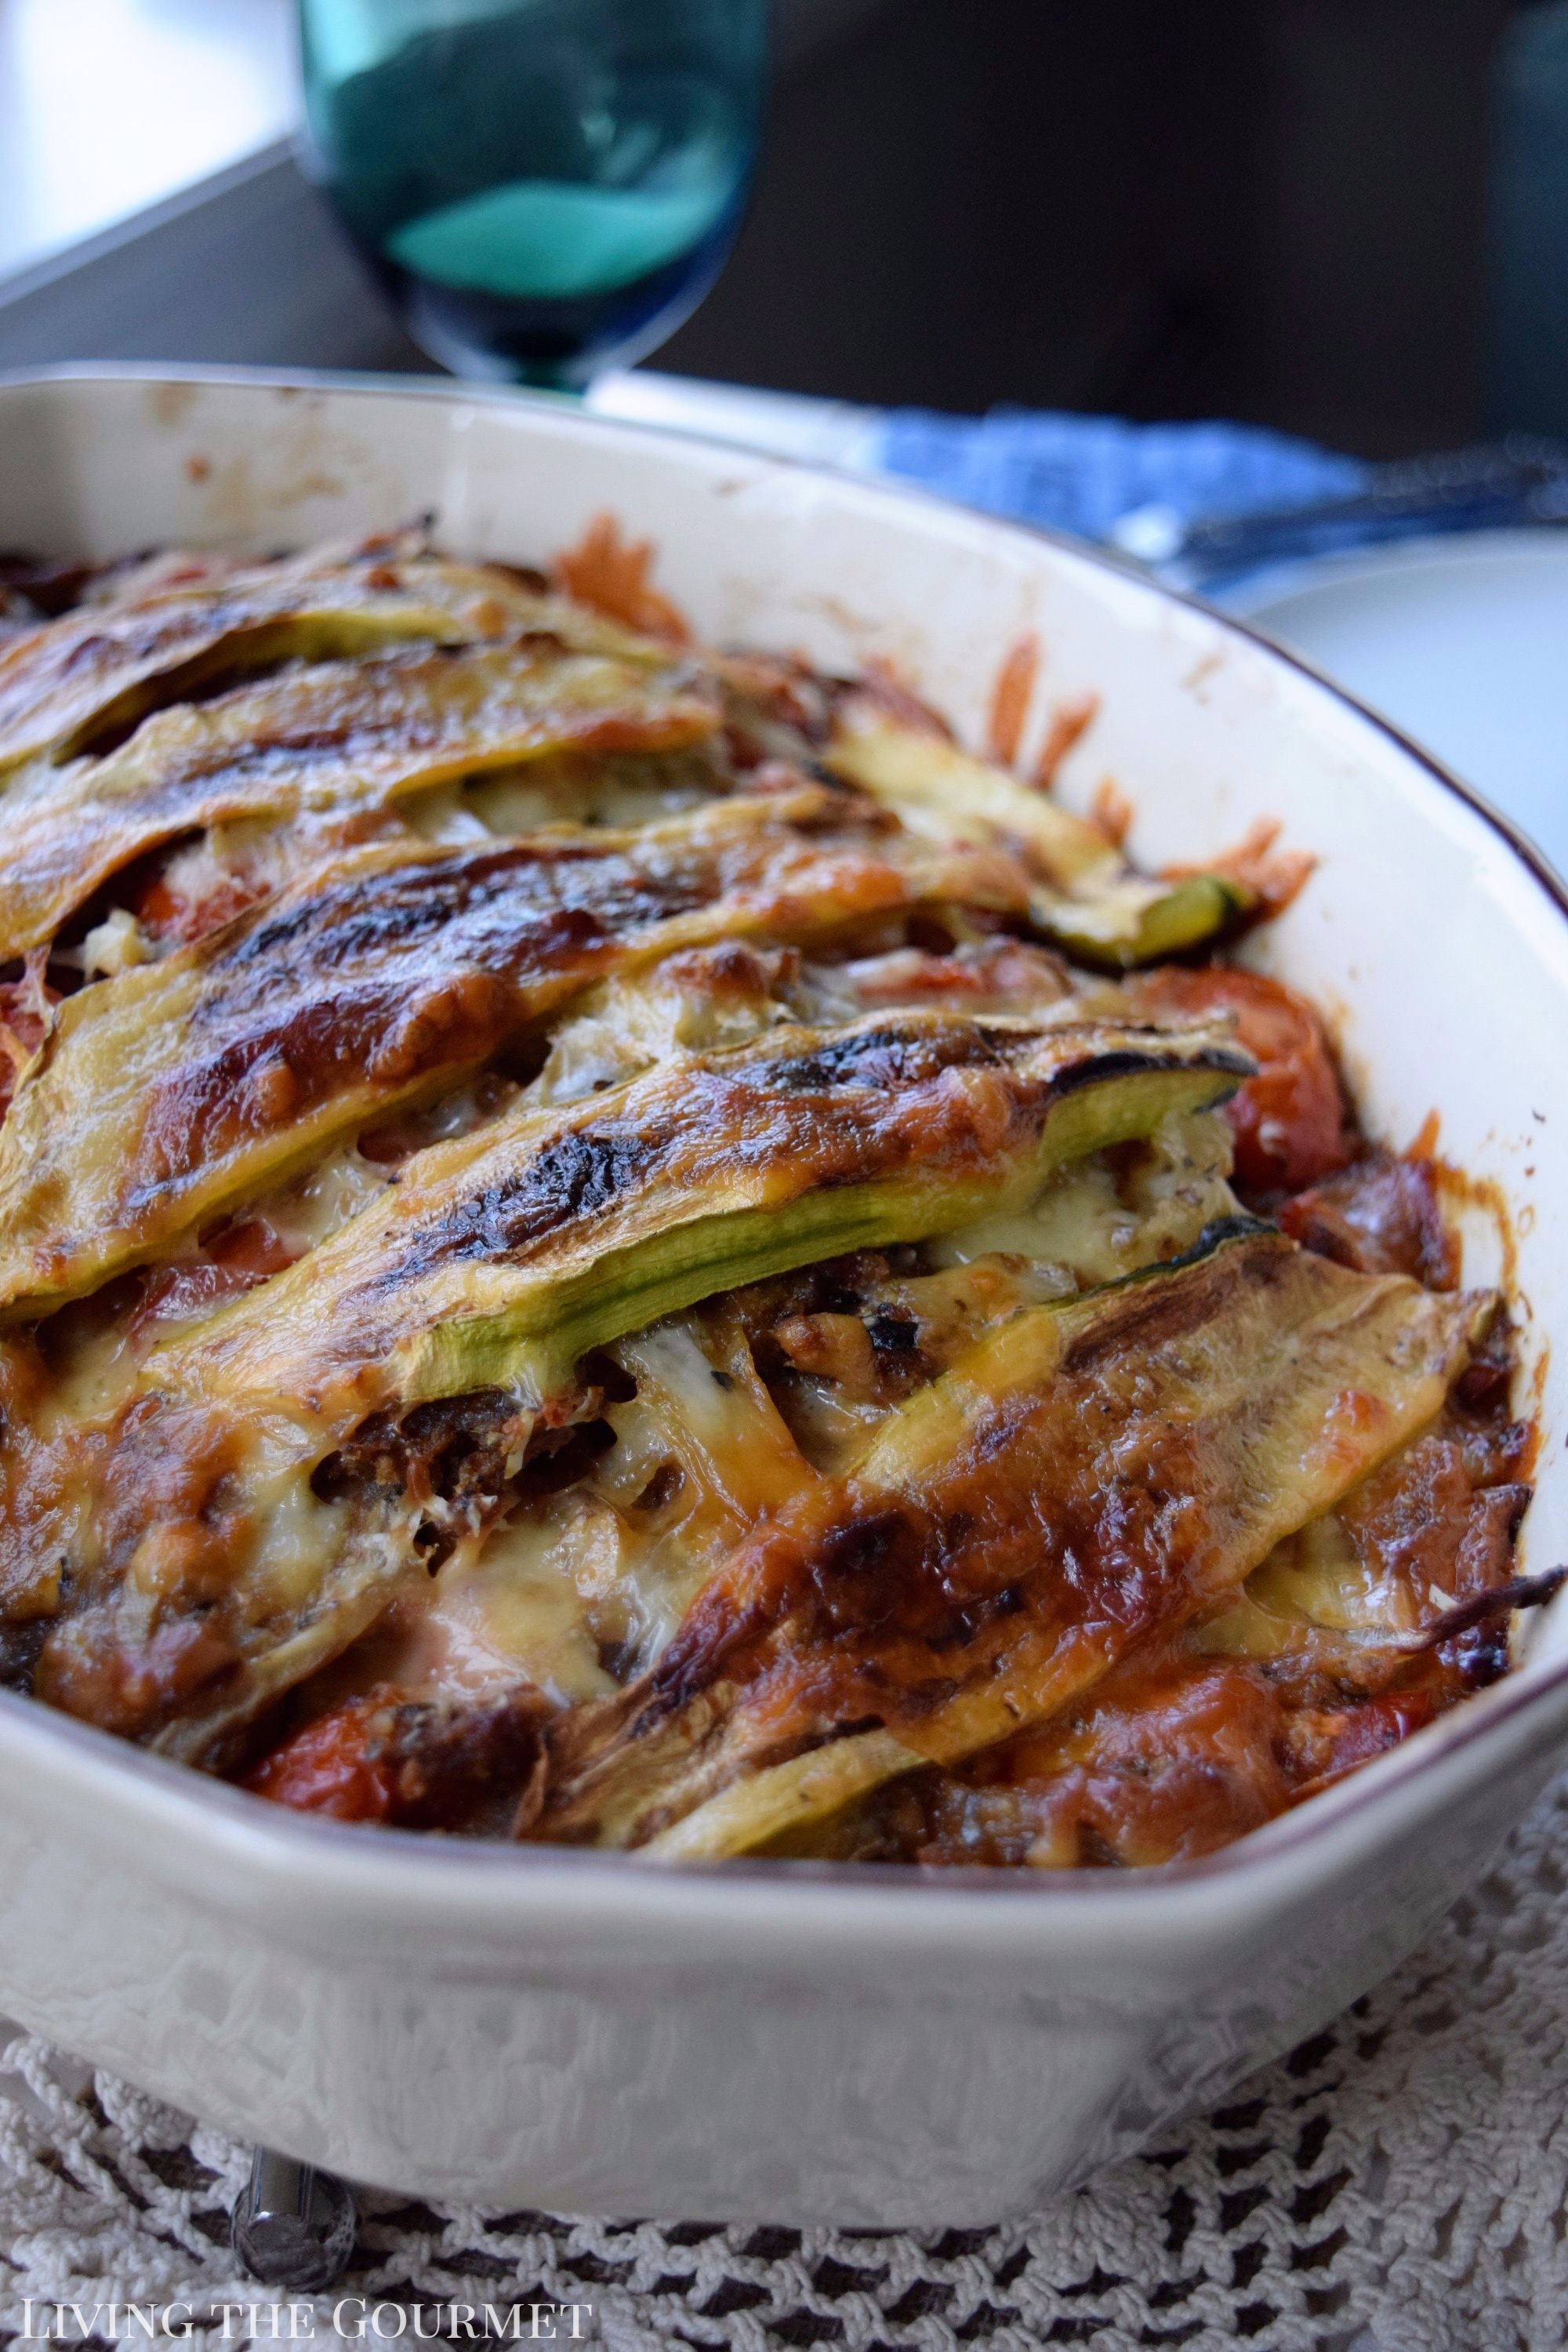 Living the Gourmet: Enjoy the season's final harvest of zucchini with this vegetarian Zucchini Lasagna!